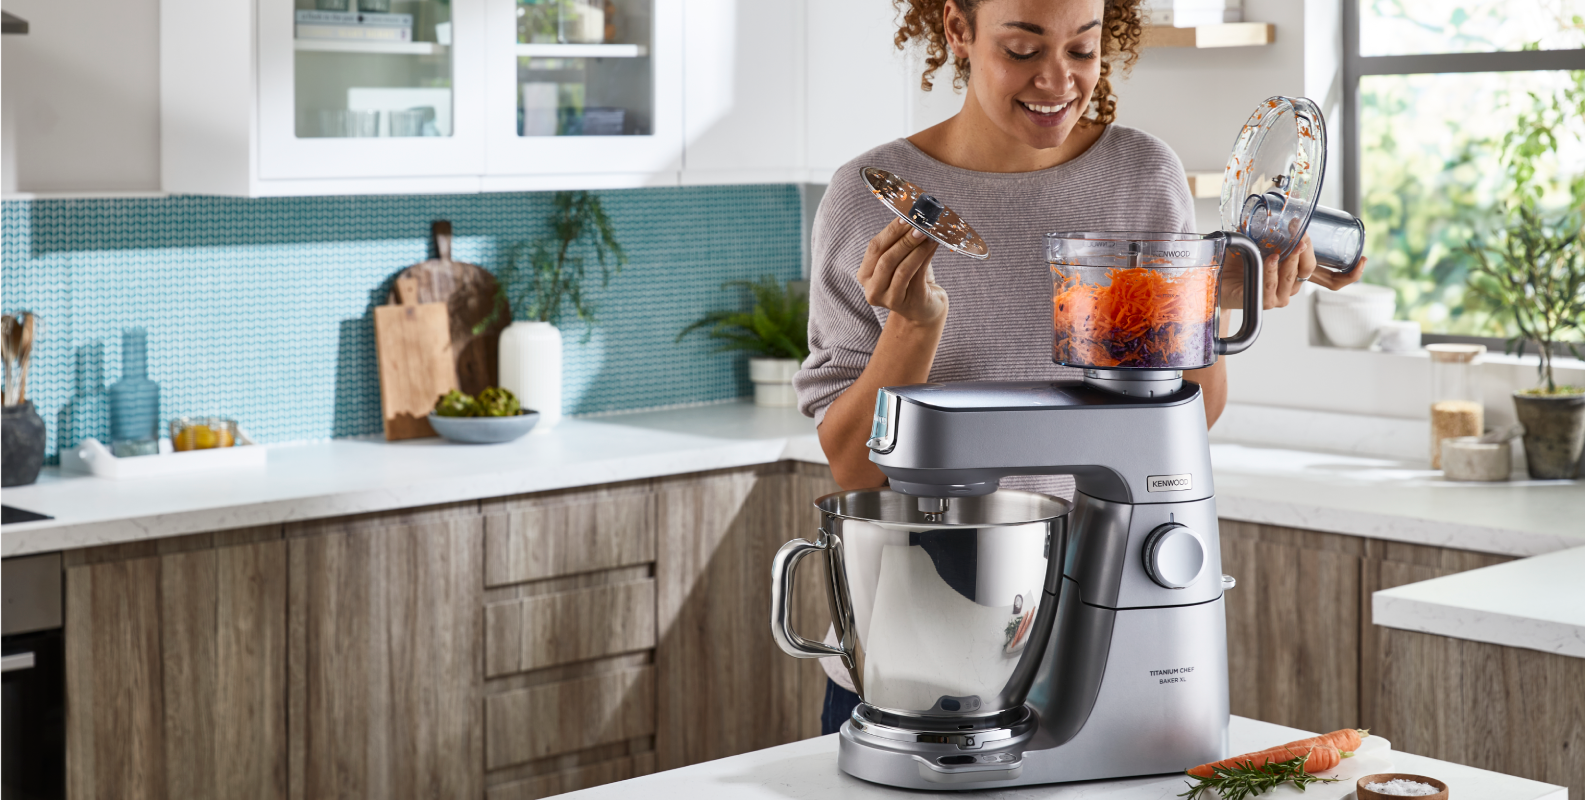 5 attachments to use with your Kenwood stand mixer | Kenwood UK